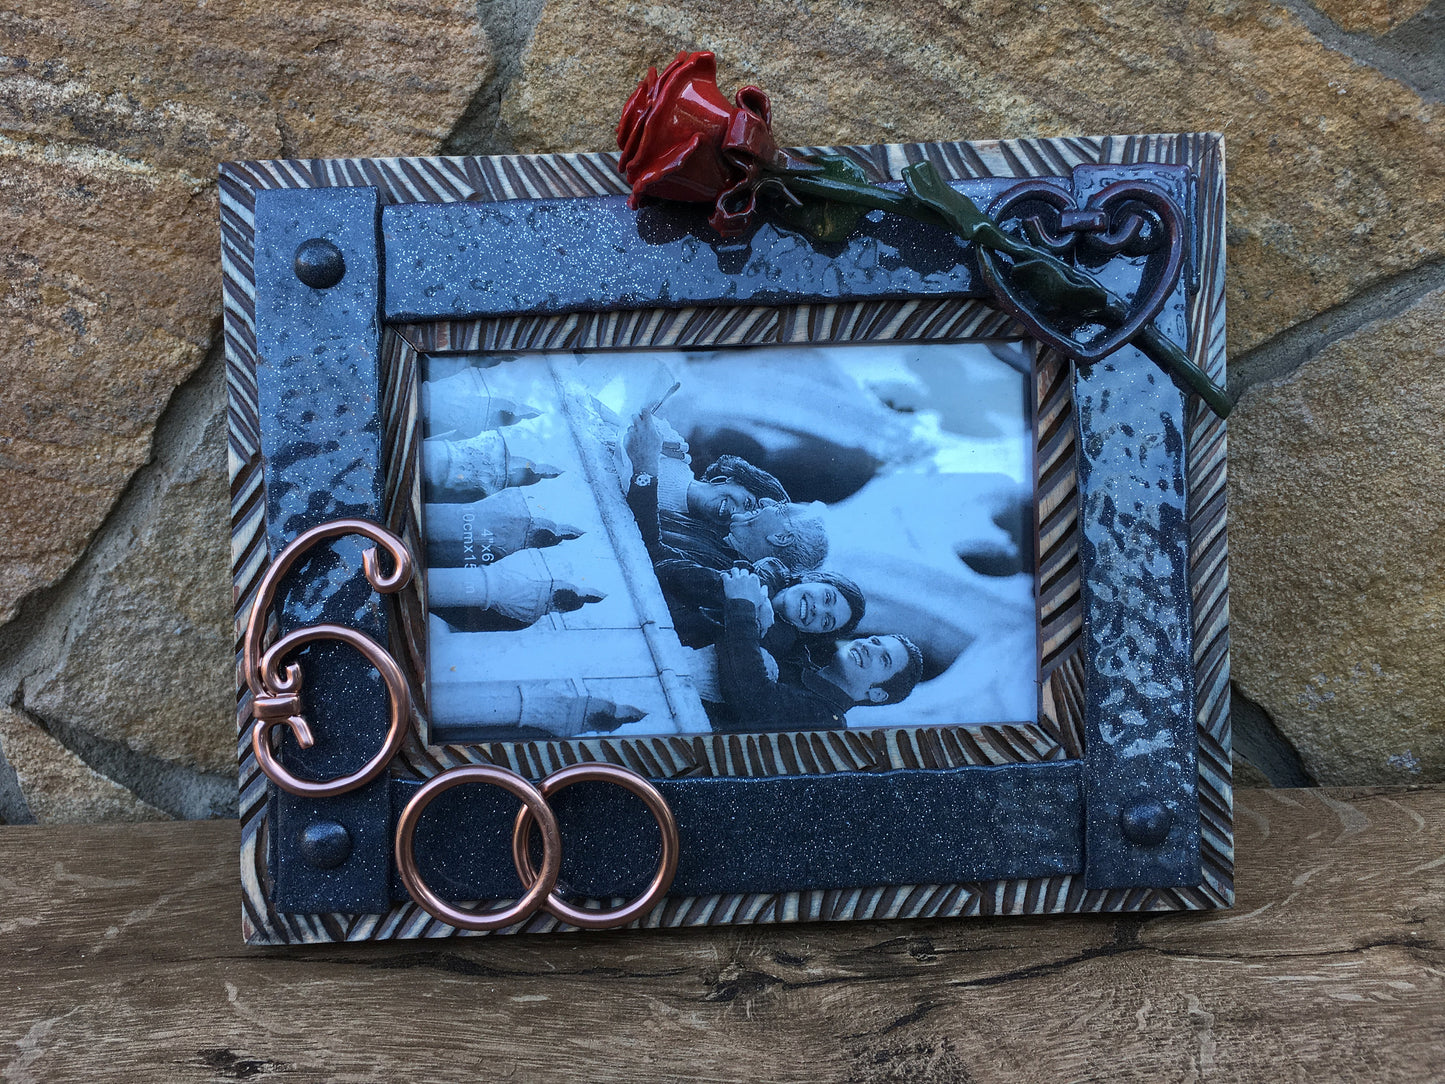 6th anniversary, 6th anniversary gift, iron anniversary, iron anniversary gift, iron gift, 6 year, photo frame,picture frame,iron rose,rings